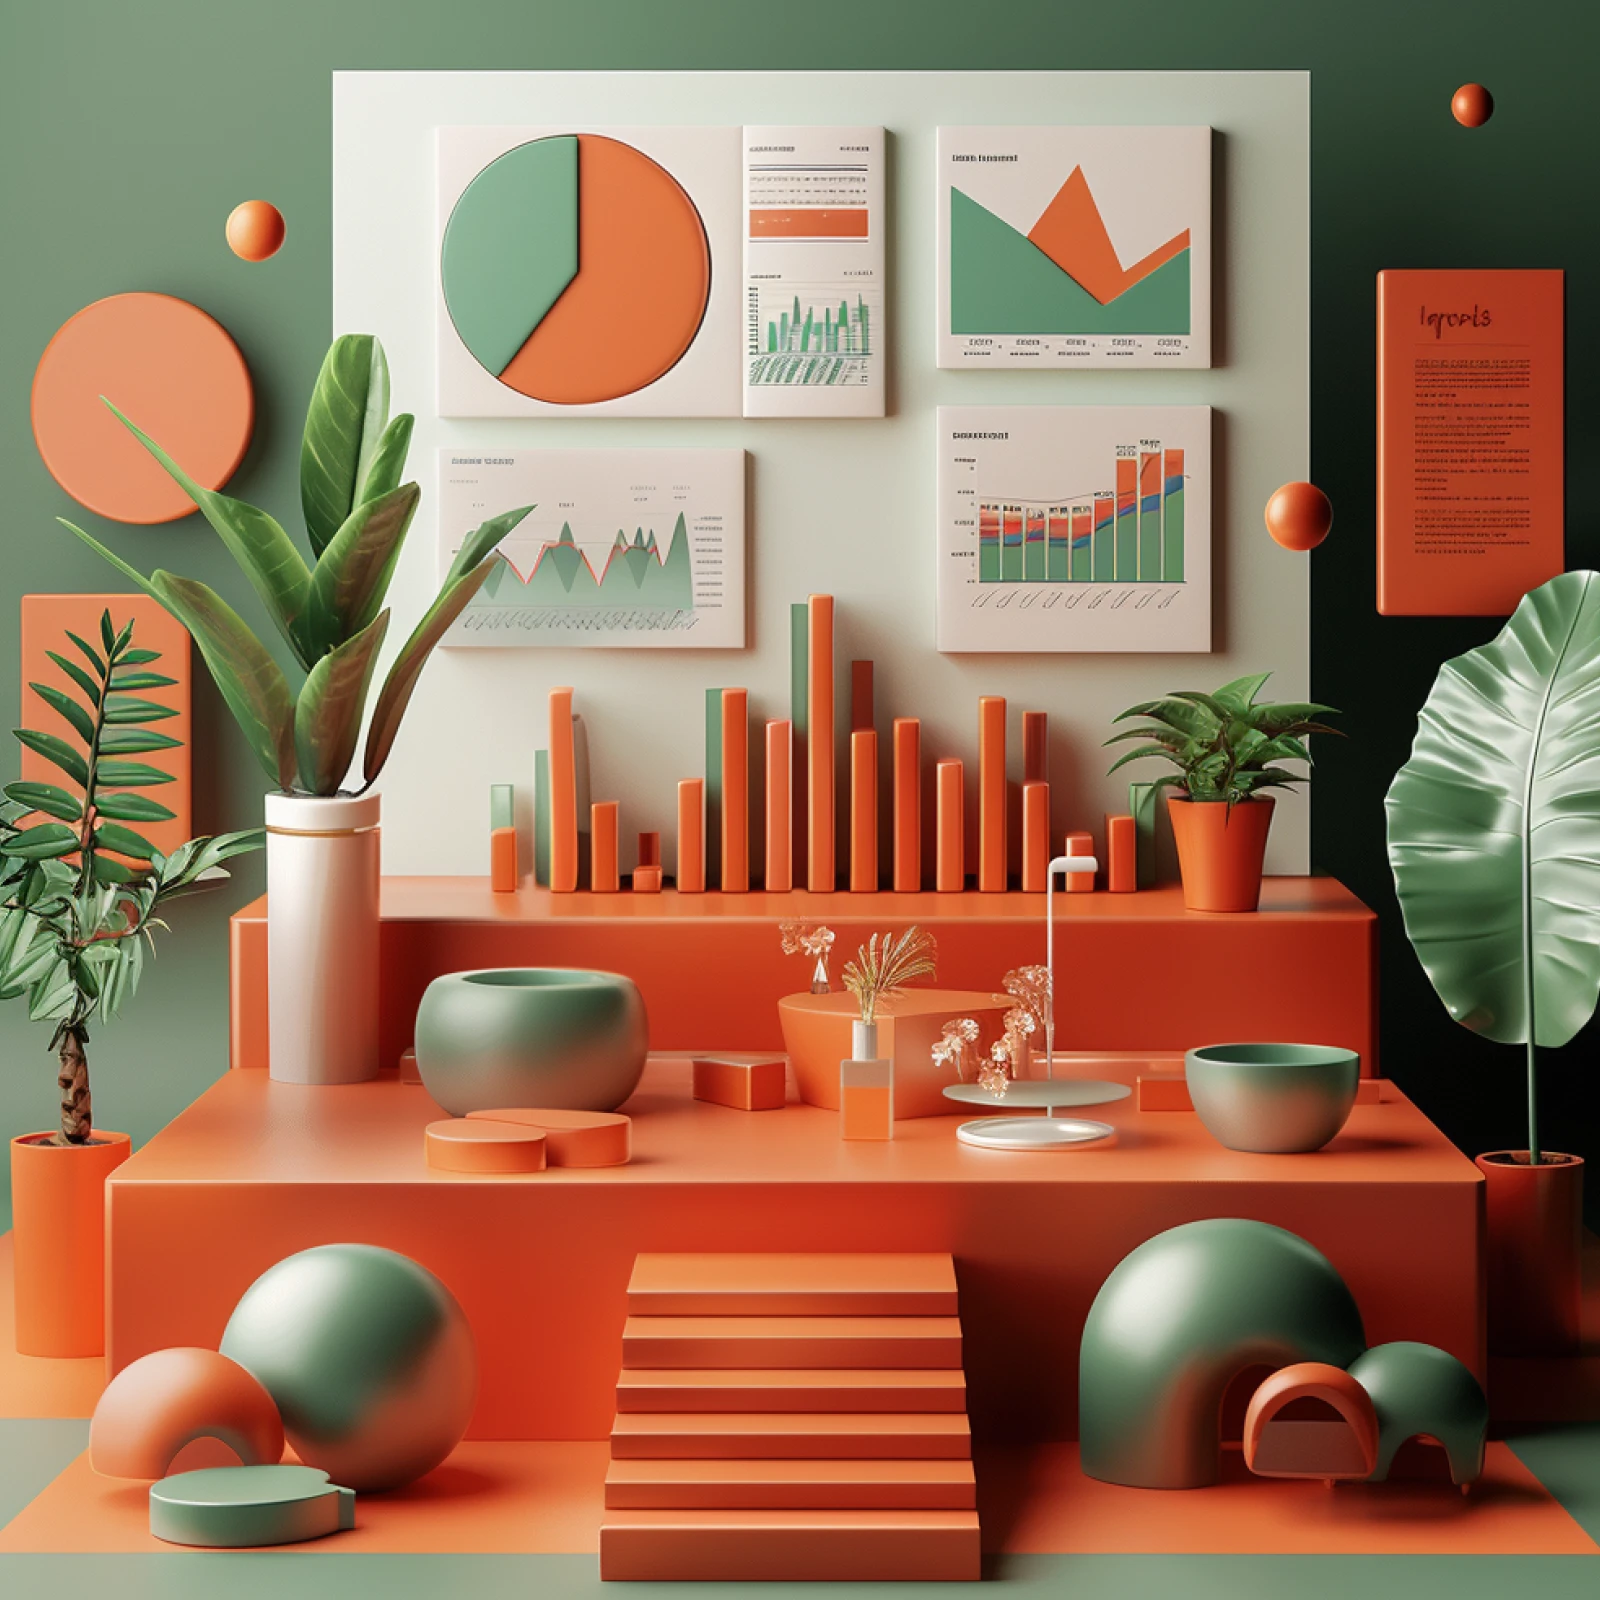 A 3D illustration of an office with charts and graphs on the wall, along with office plants and 3D shapes